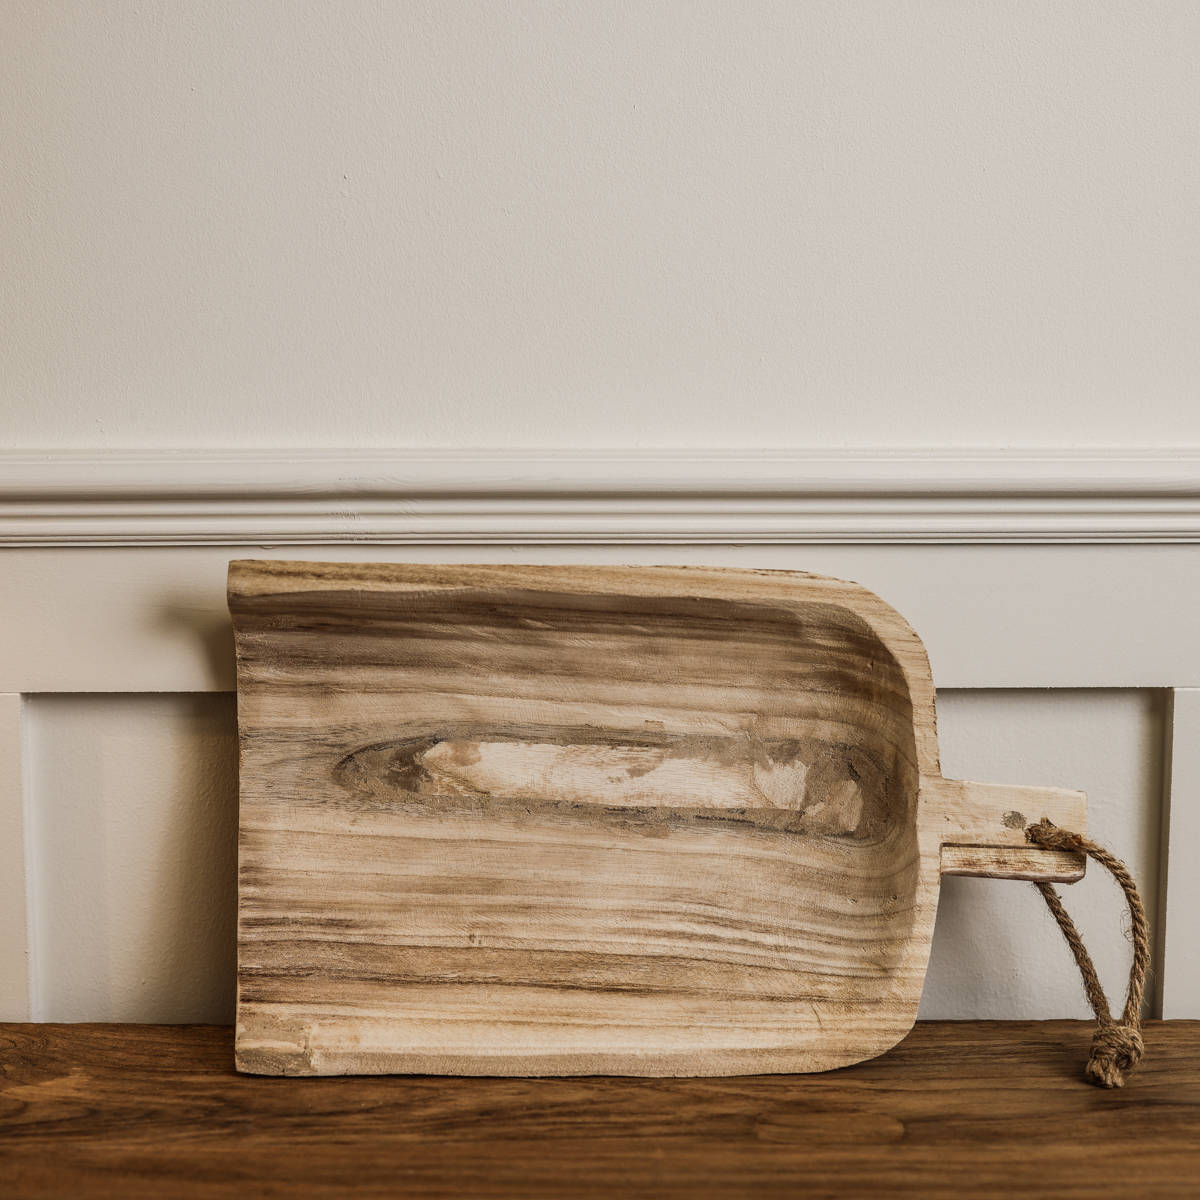 Wooden shovel tray on side against a wall.